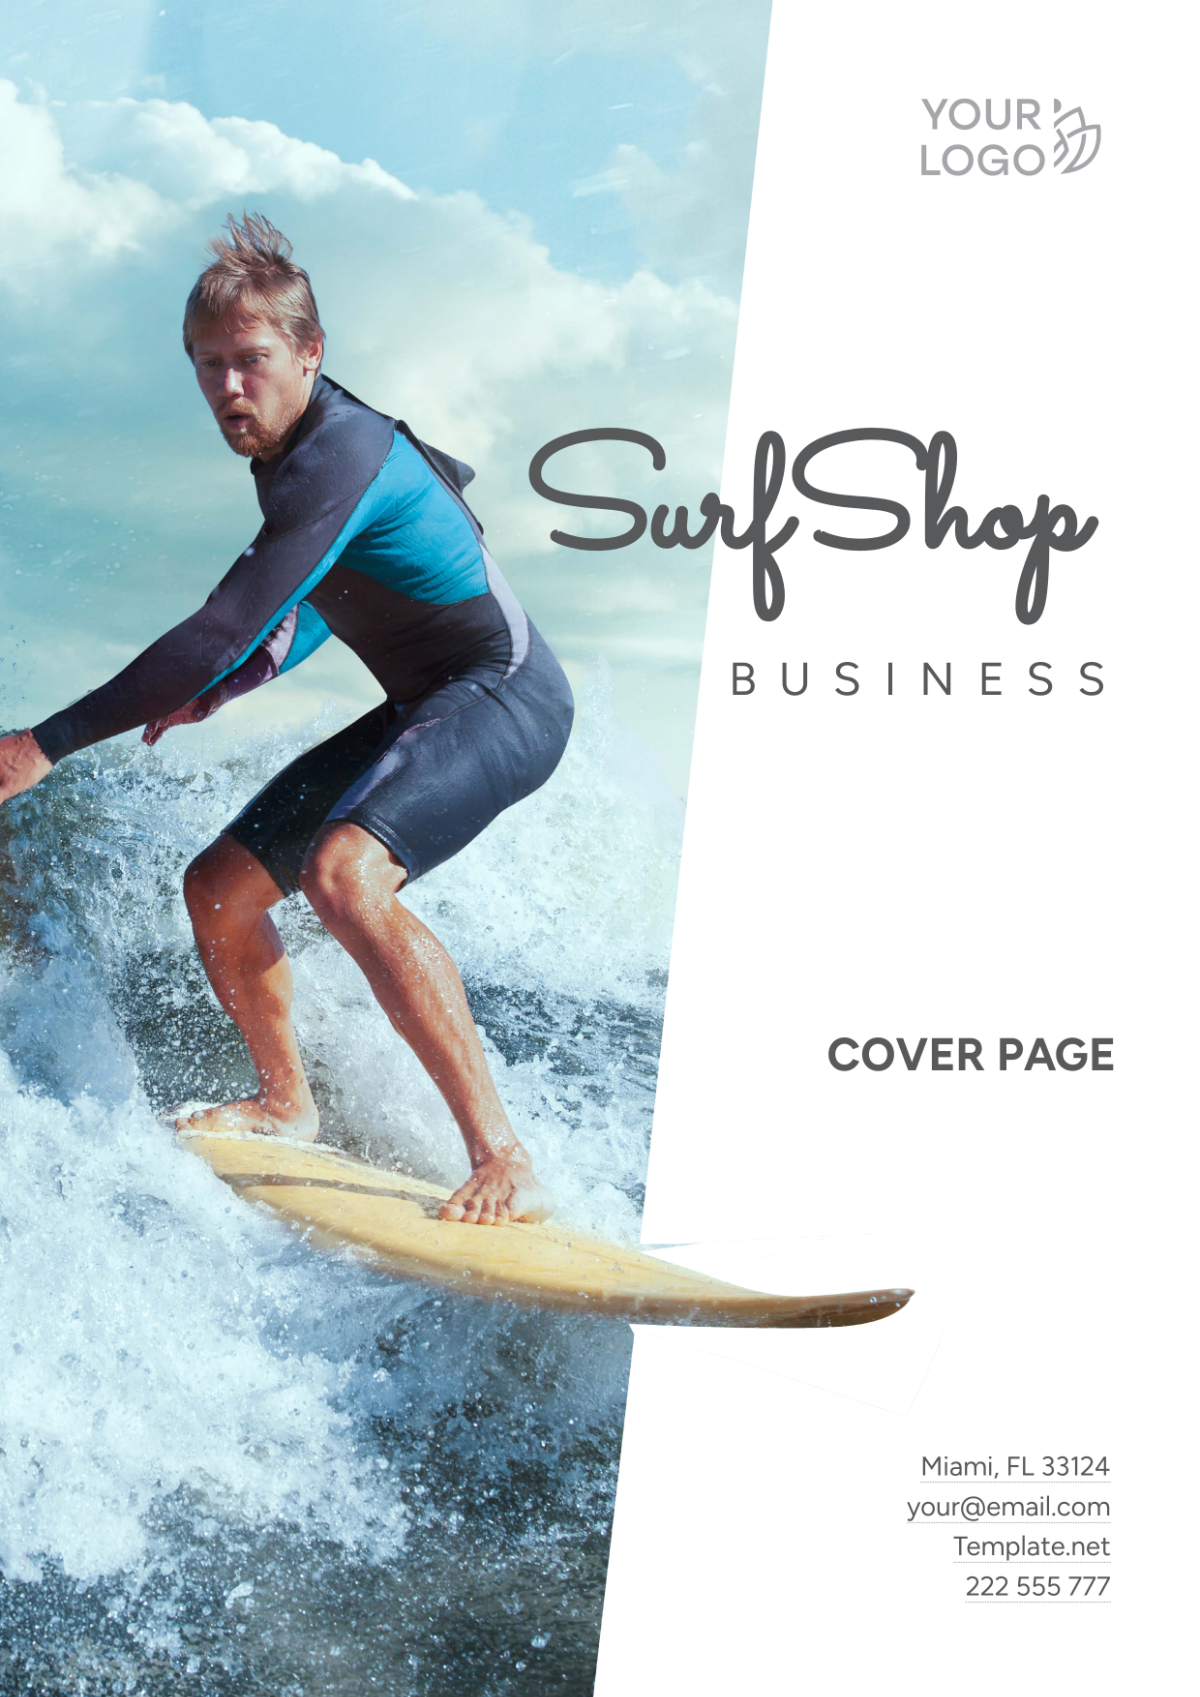 Surf Shop Business Cover Page Template